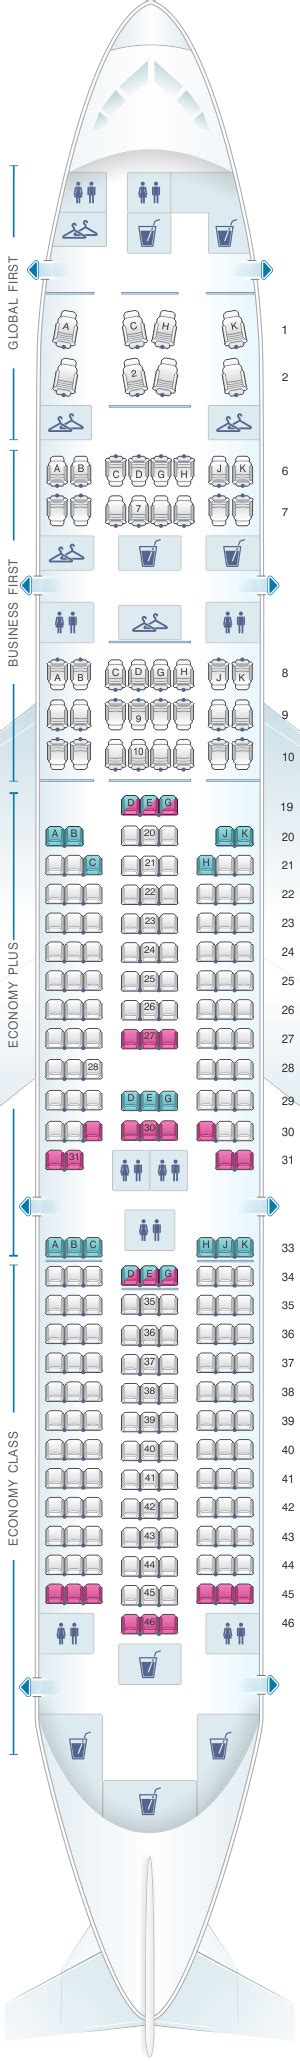 United airlines seating chart 777-200. AA 777 200 Seat Map (777): Overview. The Boeing 777-200 American Airlines is a 273-seater aircraft sectioned into three primary cabins, with one having an annexing section. The Business section contains 37 fully-reclinable seats; the 24 Premium Economy seats are also recliners, although not up to 180 degrees like the Business Class. 